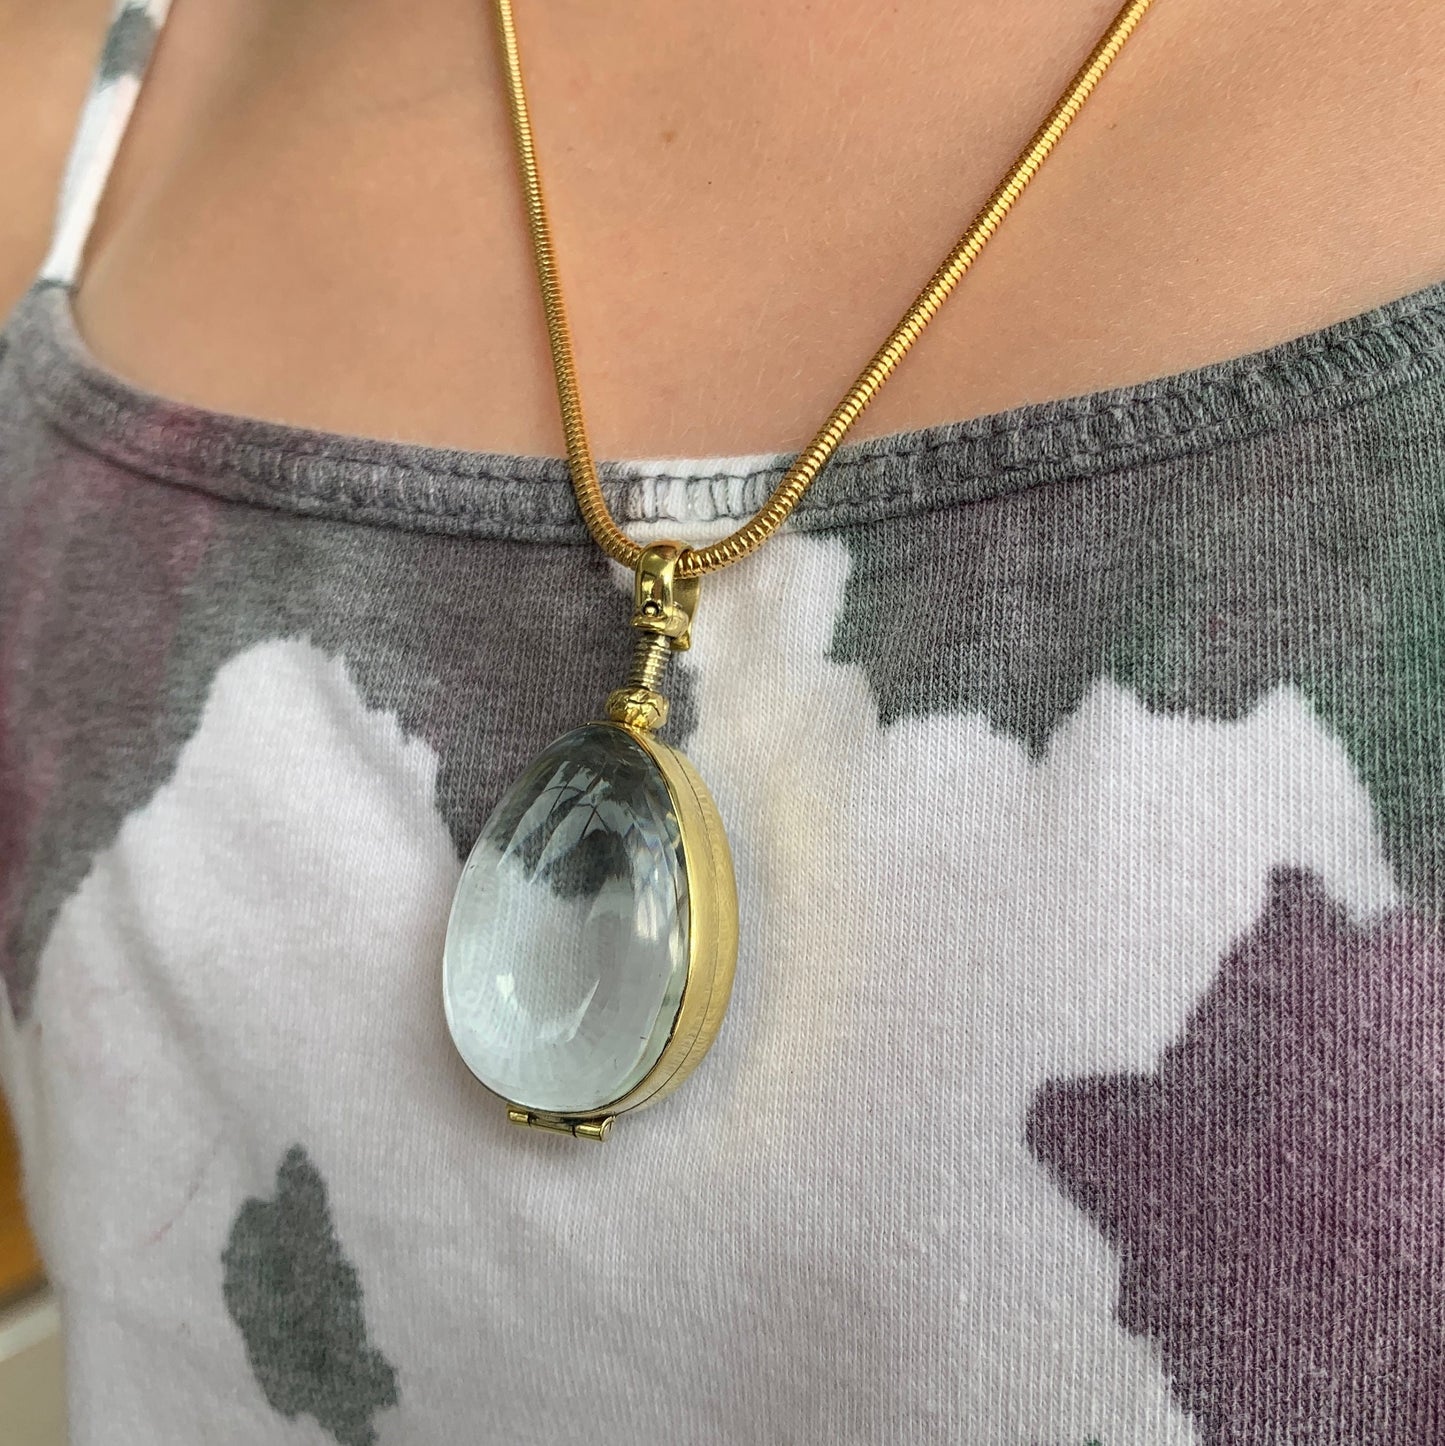 Gold Locket Memorial Necklace for Hair Glass Locket Necklace Gold Locket Pendant Necklace Teardrop Silver Locket Necklace for Photos